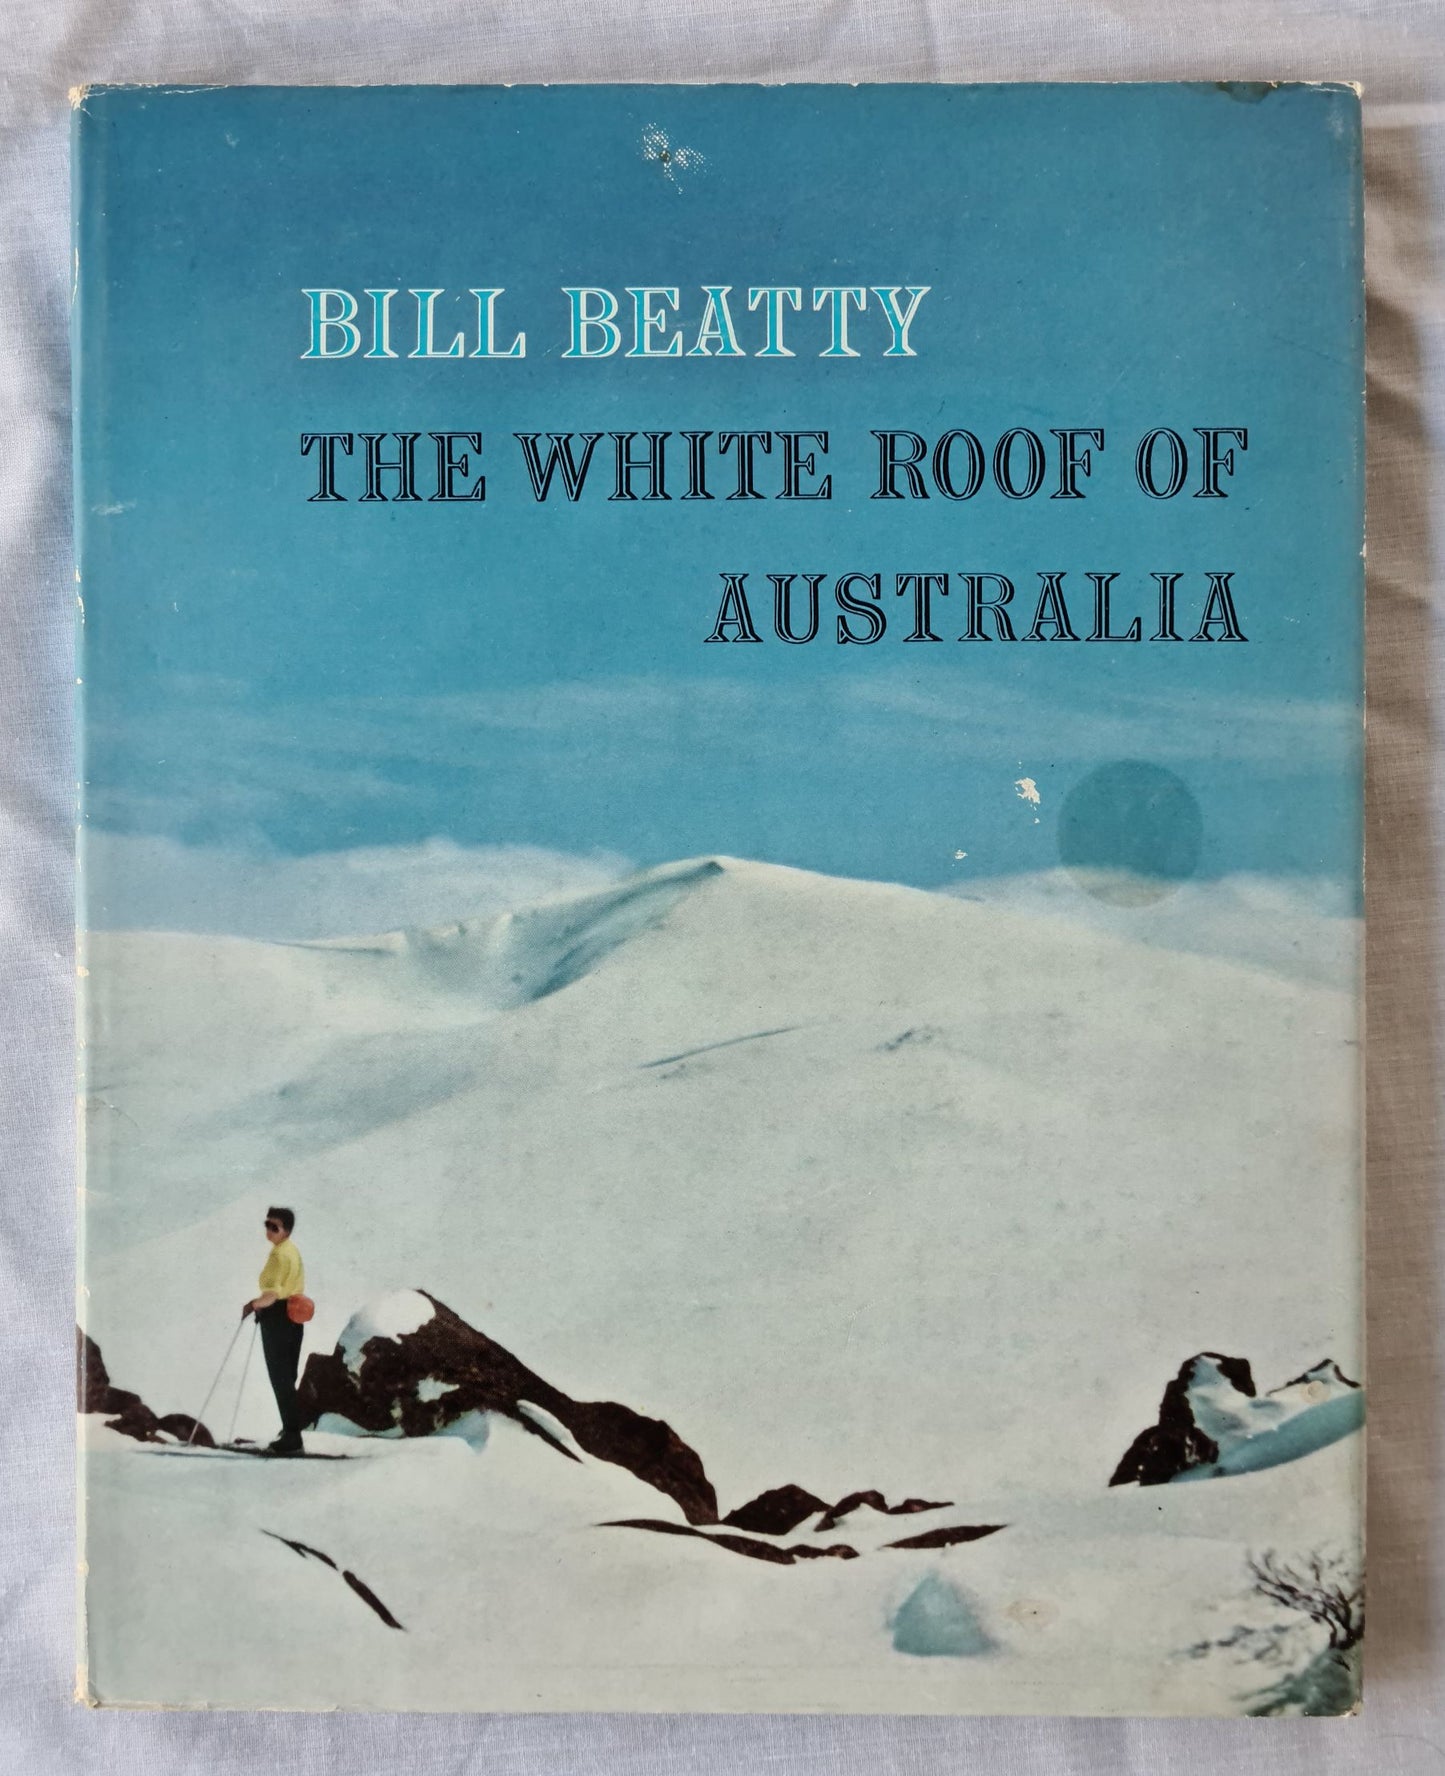 The White Roof of Australia by Bill Beatty